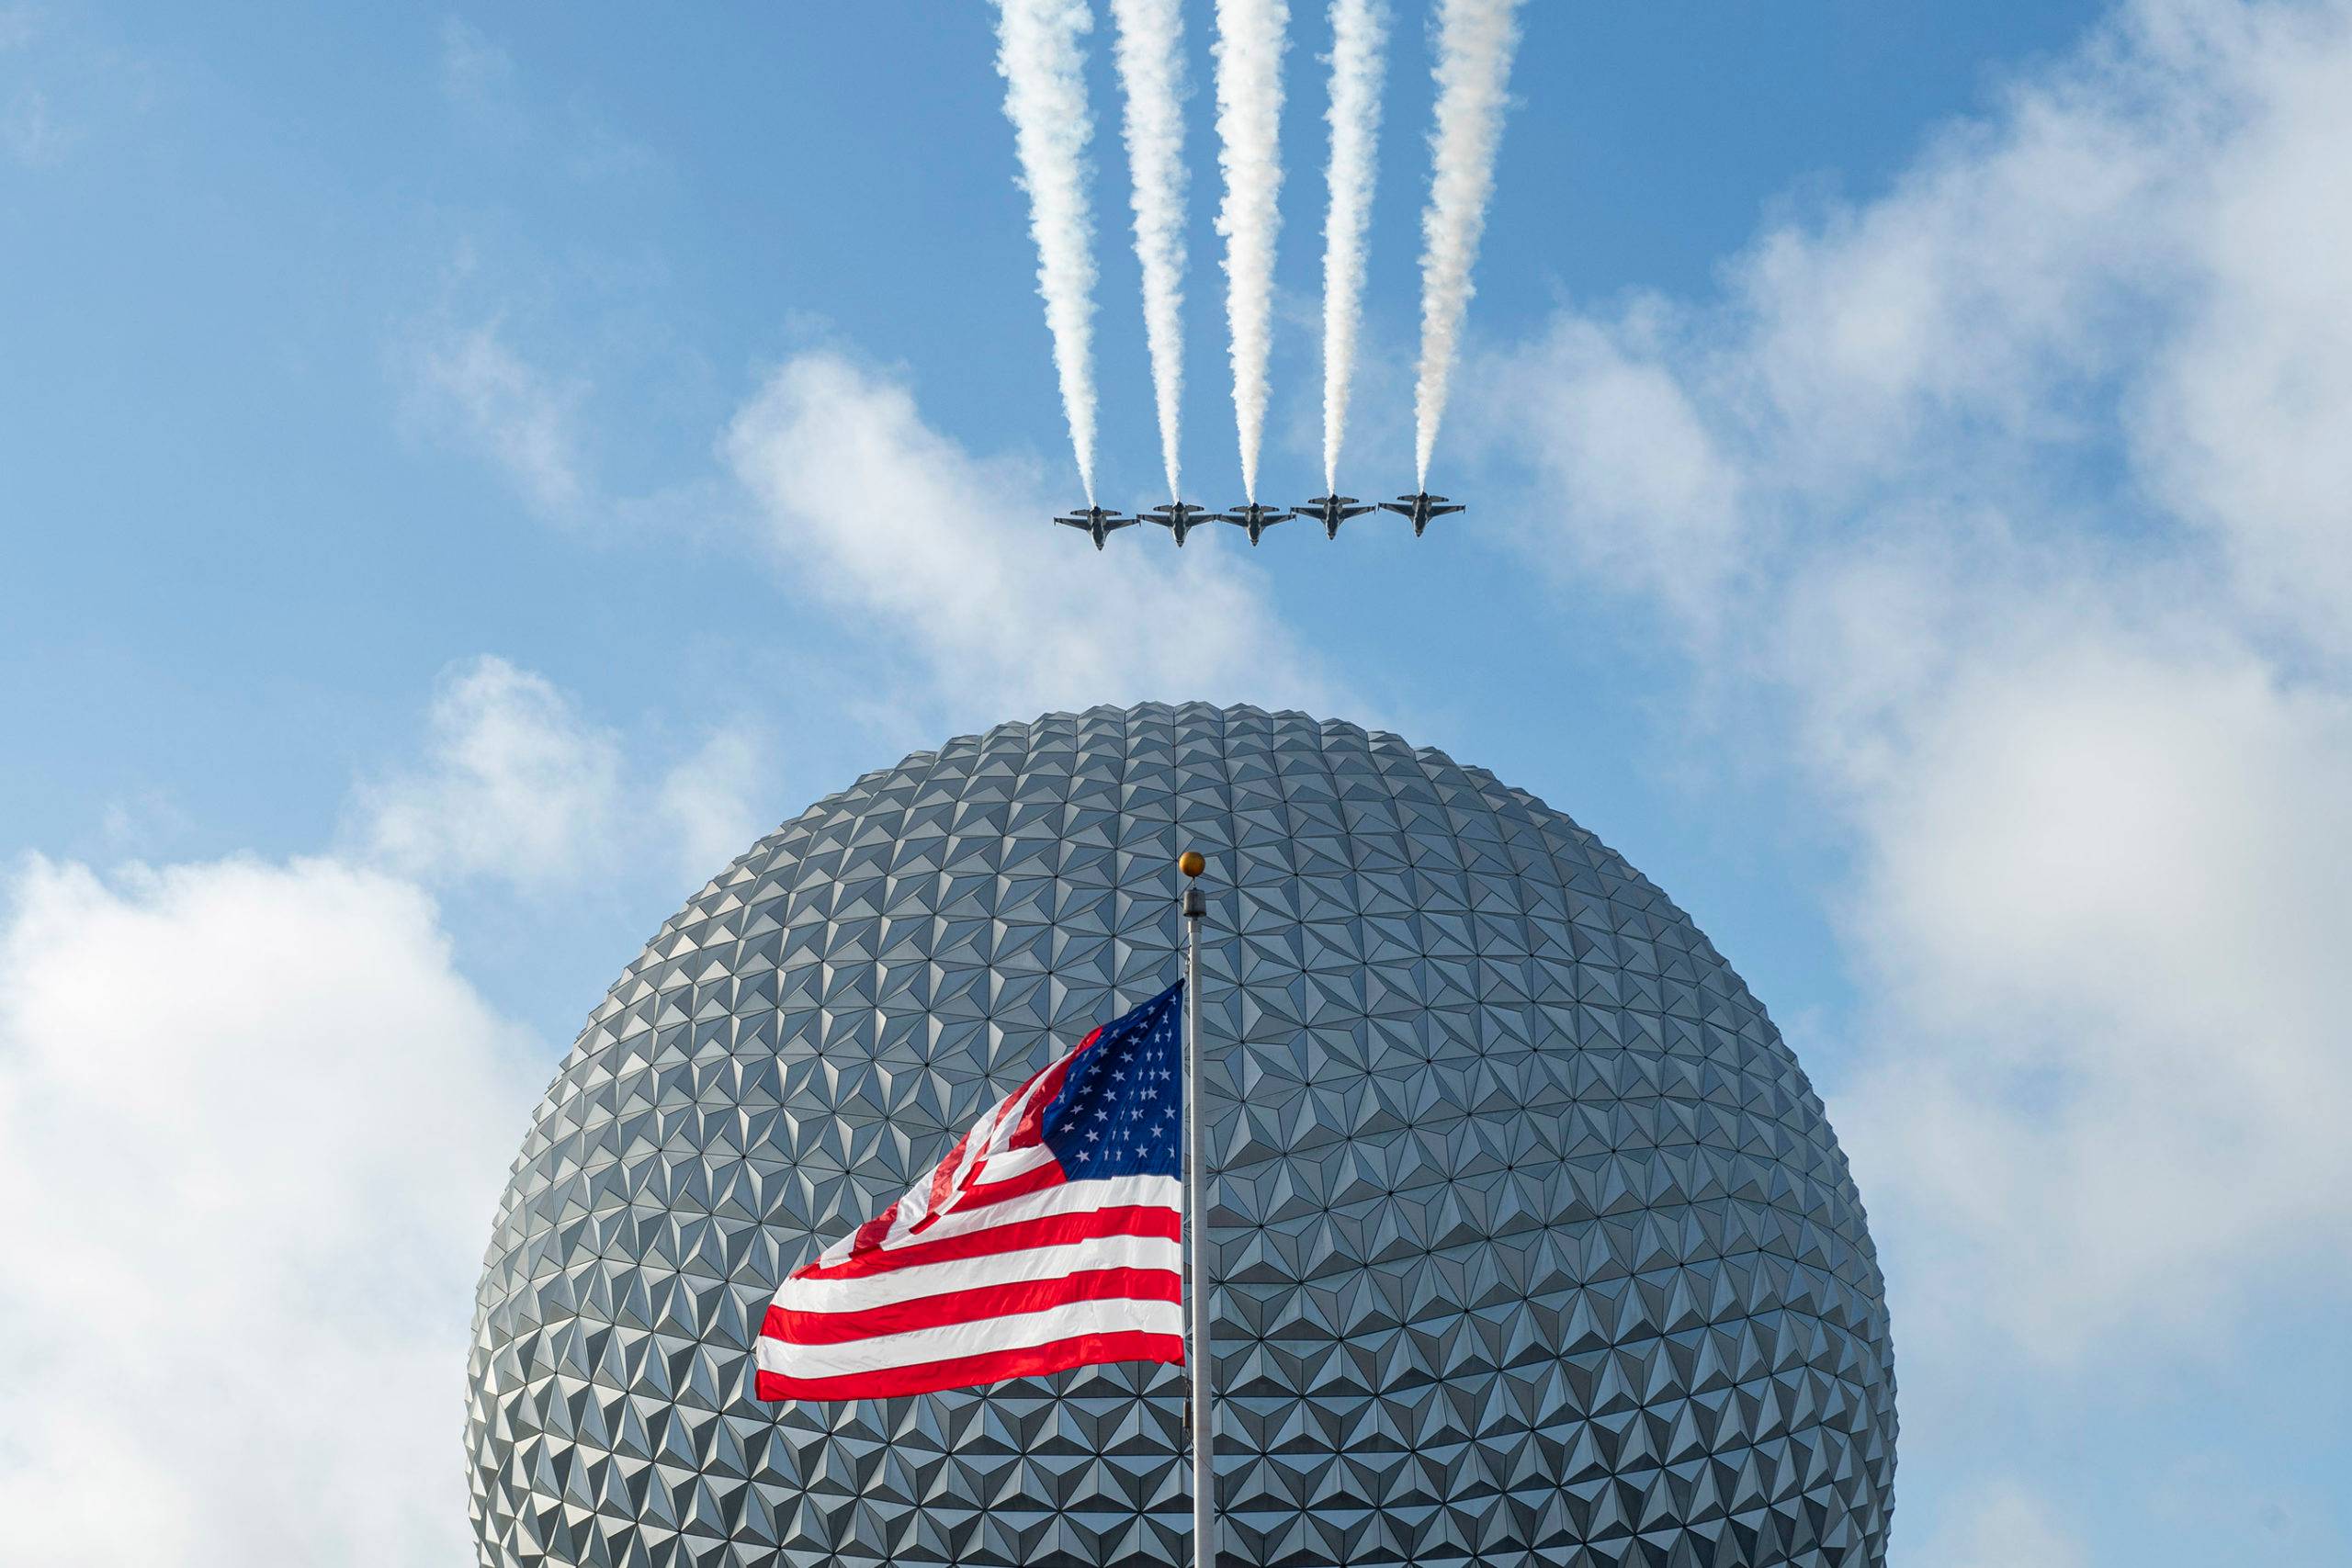 U.S. Air Force Thunderbirds will fly over Magic Kingdom and EPCOT